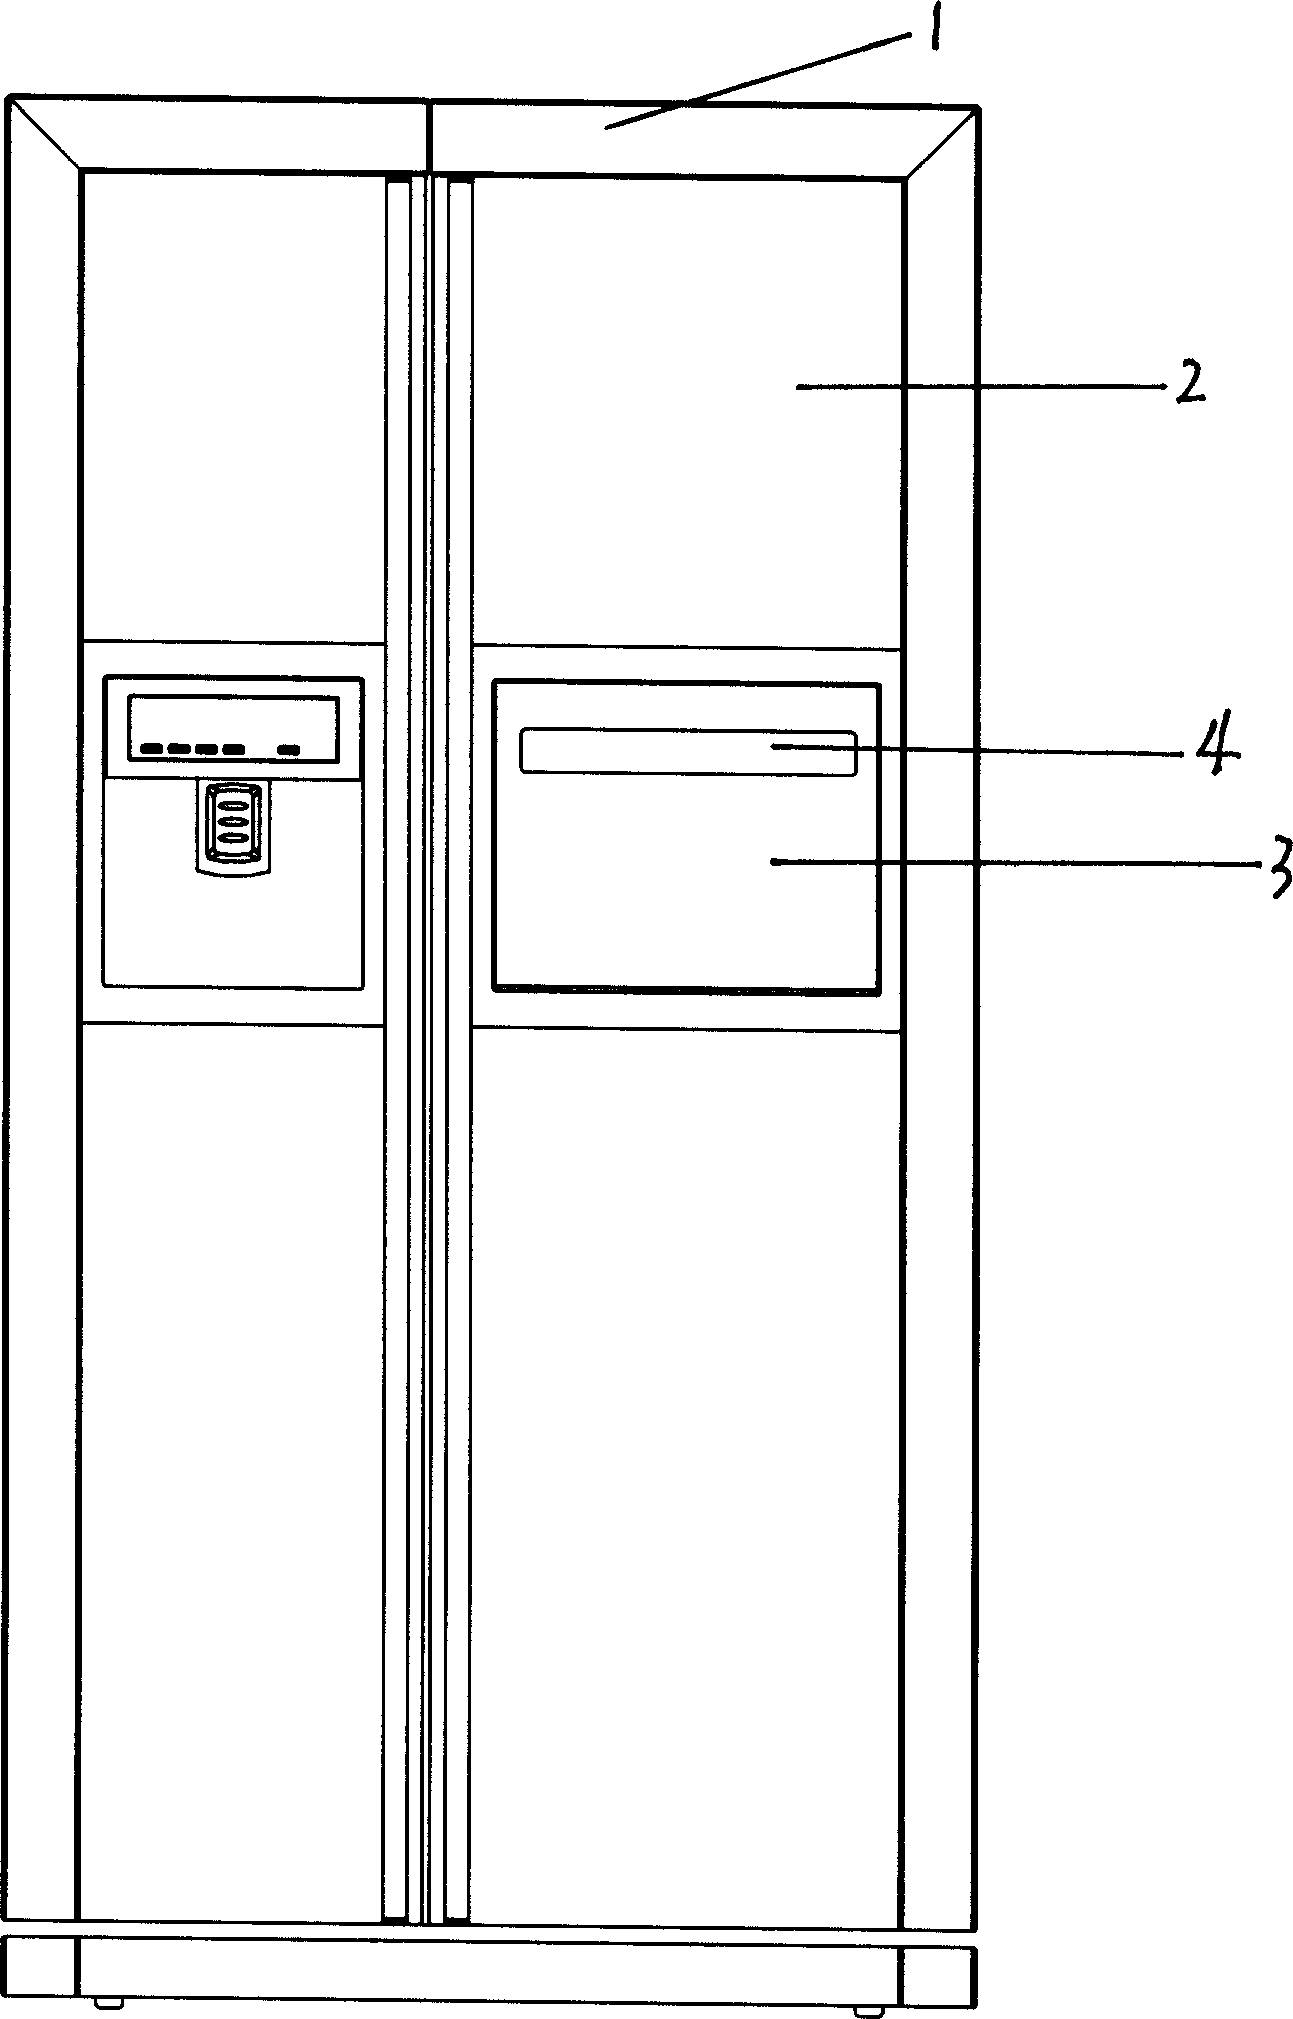 Refrigerator with notebook computer built in